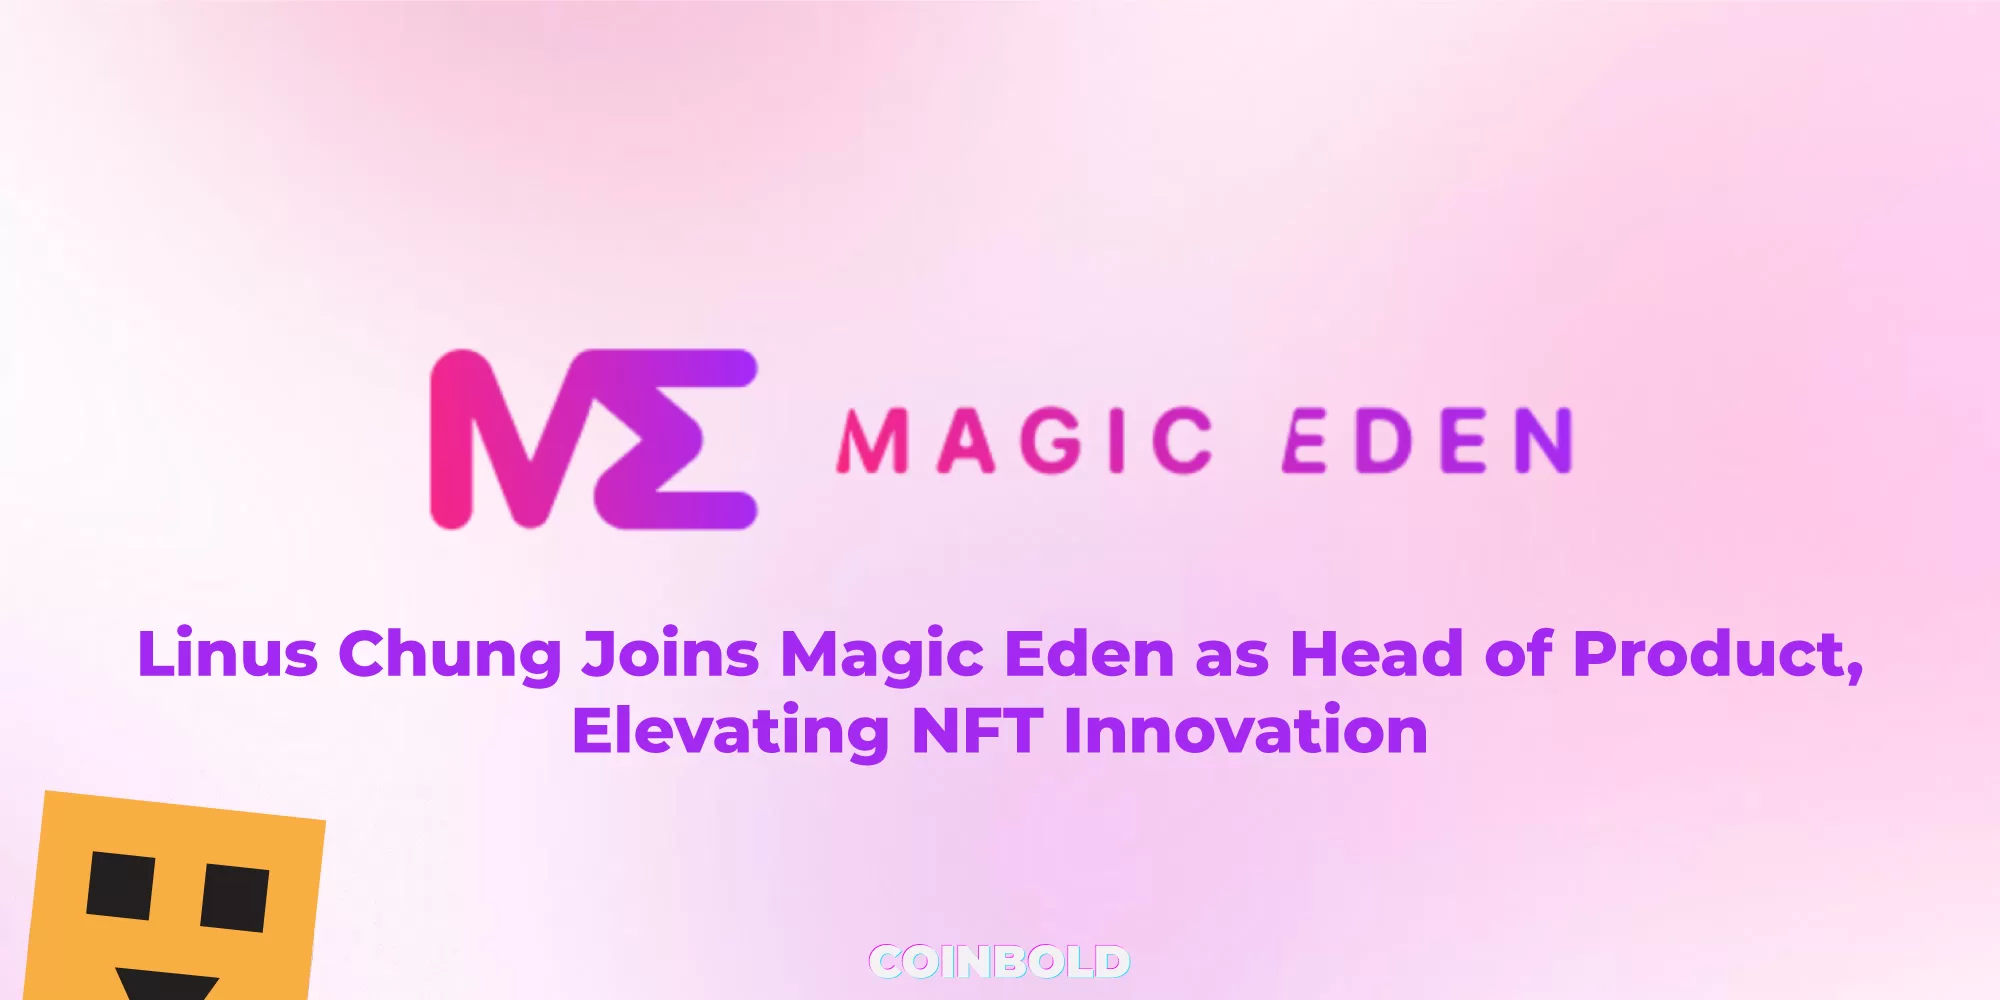 Linus Chung Joins Magic Eden as Head of Product, Elevating NFT Innovation